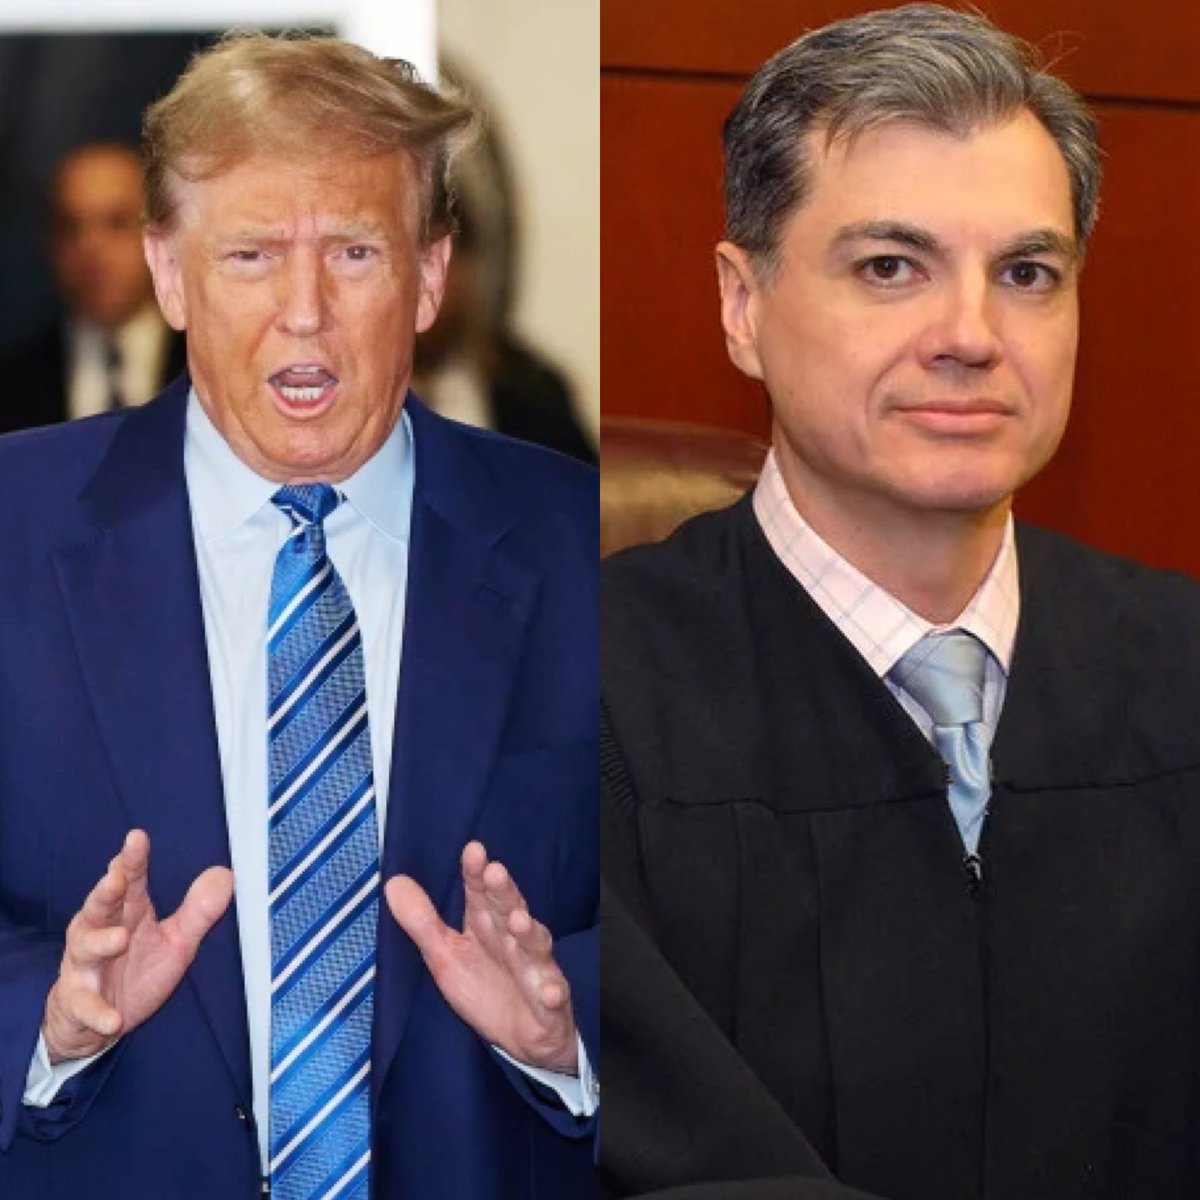 BREAKING: Donald Trump is dealt a crushing blow as Judge Juan Merchan quickly rejects his desperate request for a mistrial after Stormy Daniels’ testimony. Trump is really running out of options now… “I don’t believe we’re at the point where a mistrial is warranted,” said